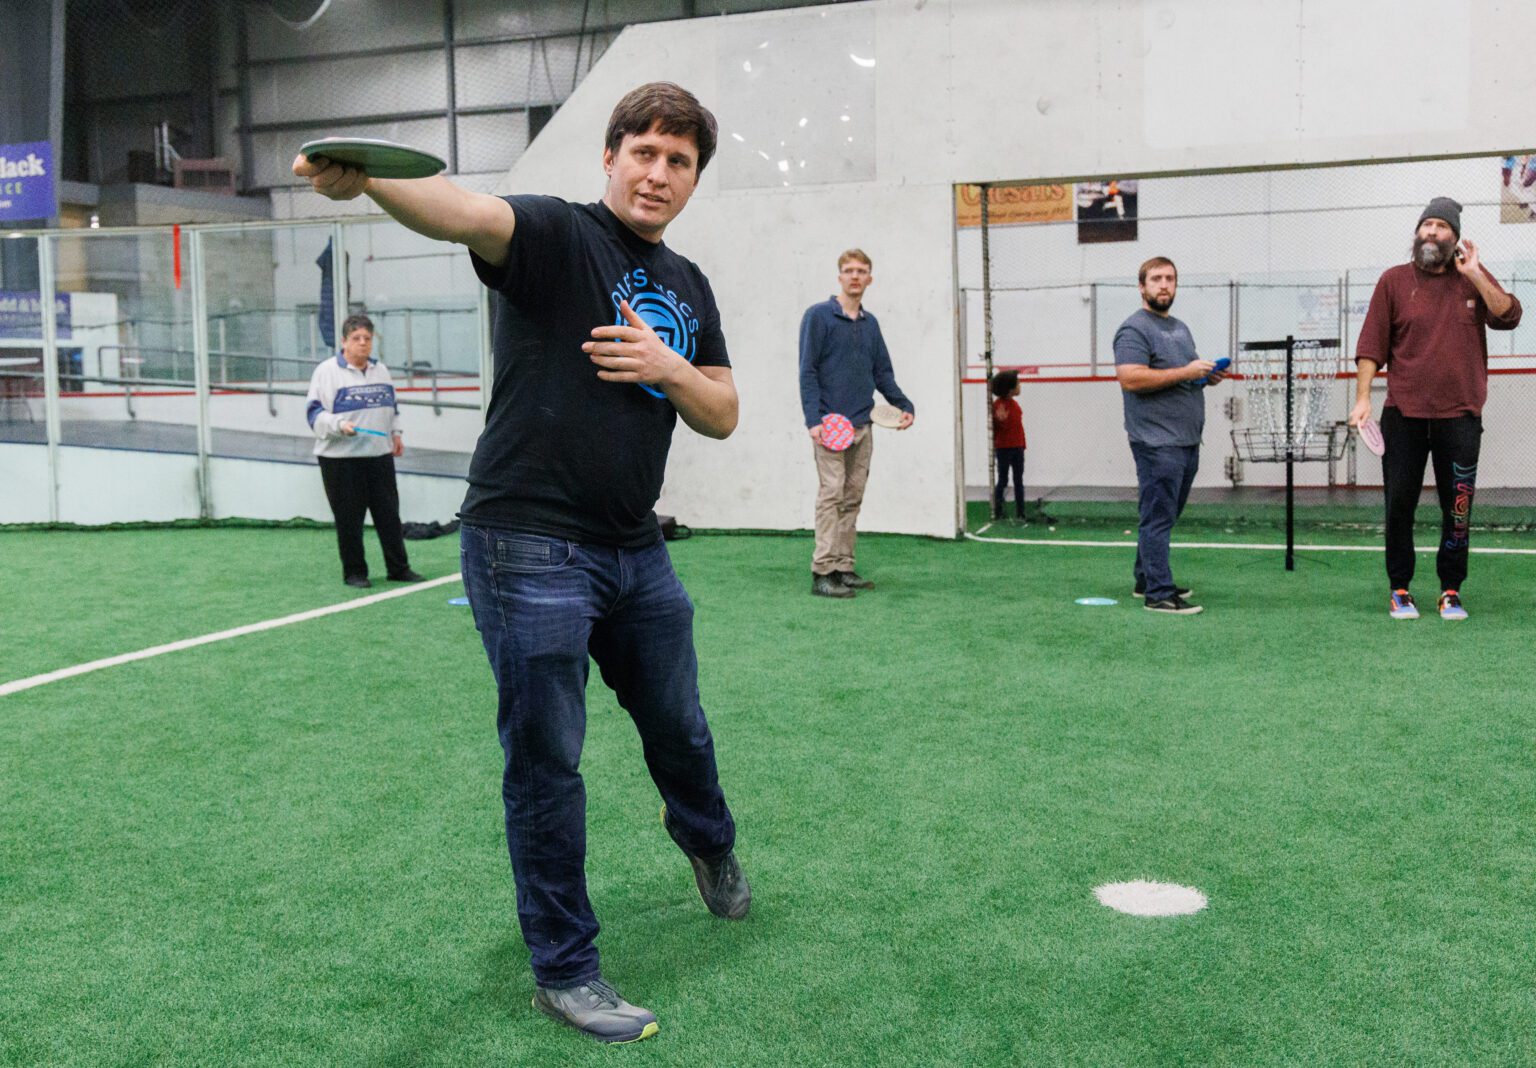 Jason Einfeld describes the proper body and arm positioning for throwing during a disc golf class at the Sportsplex on Jan. 13. The class